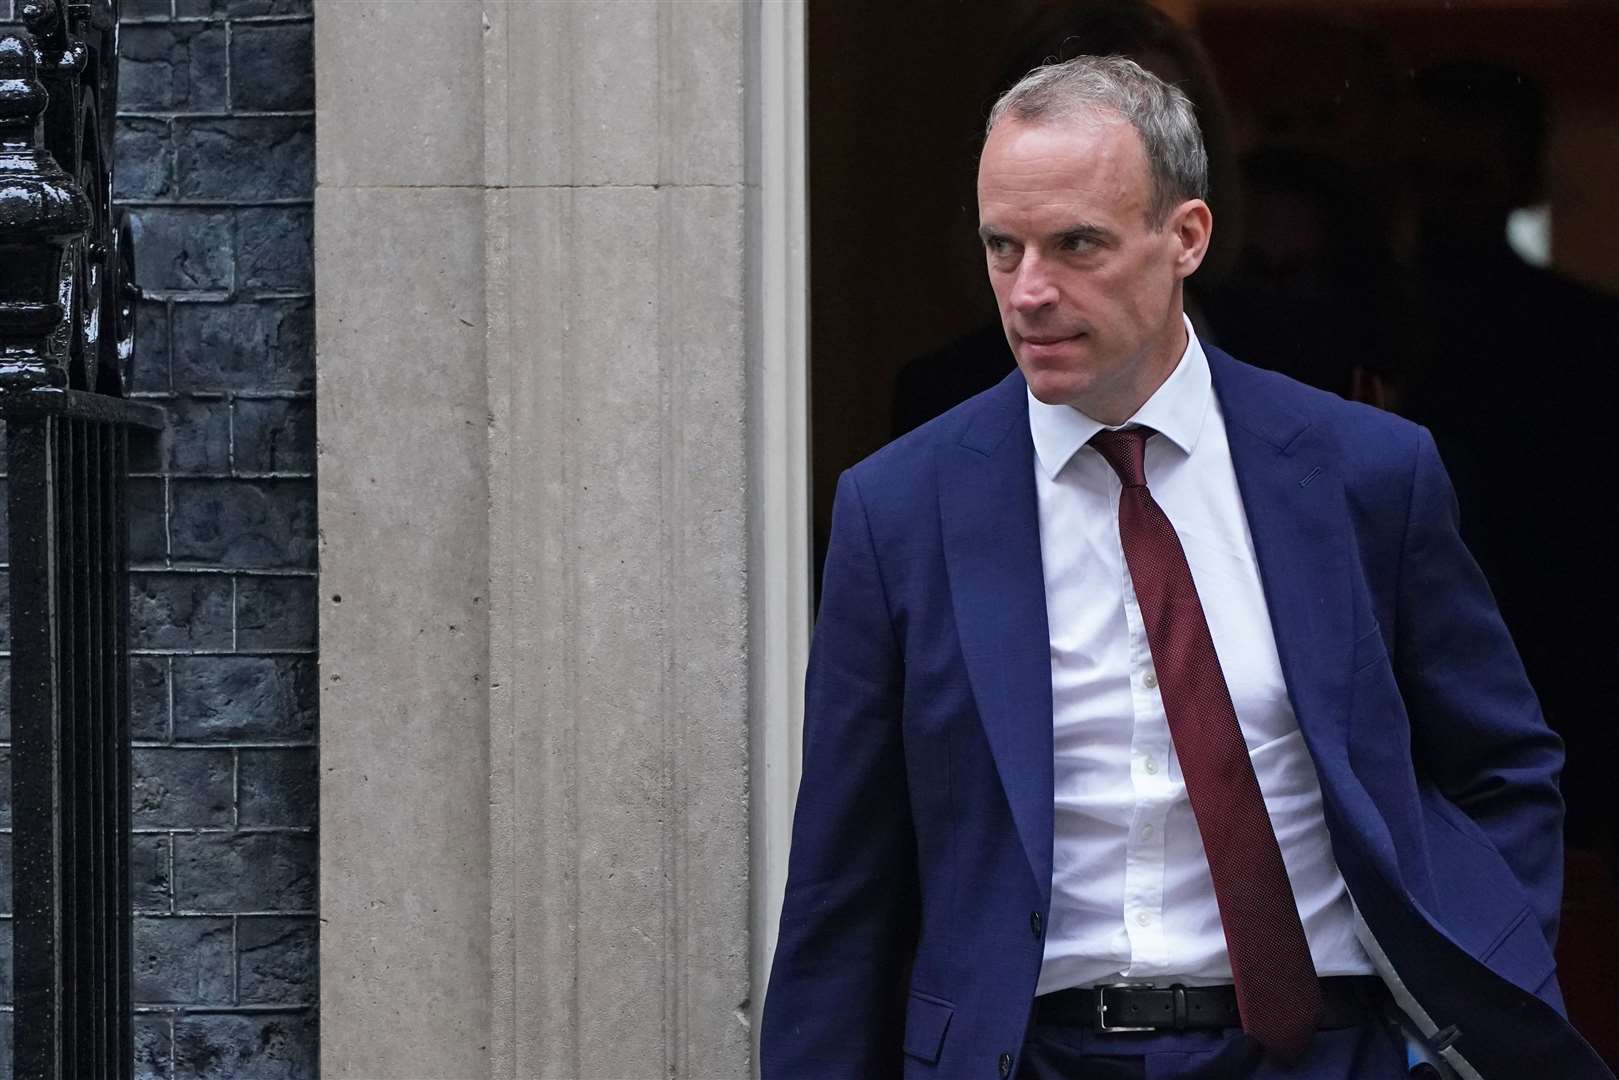 Dominic Raab, then-foreign secretary, was heavily criticised for his holiday in Crete as the Taliban swept across Afghanistan (Victoria Jones/PA)